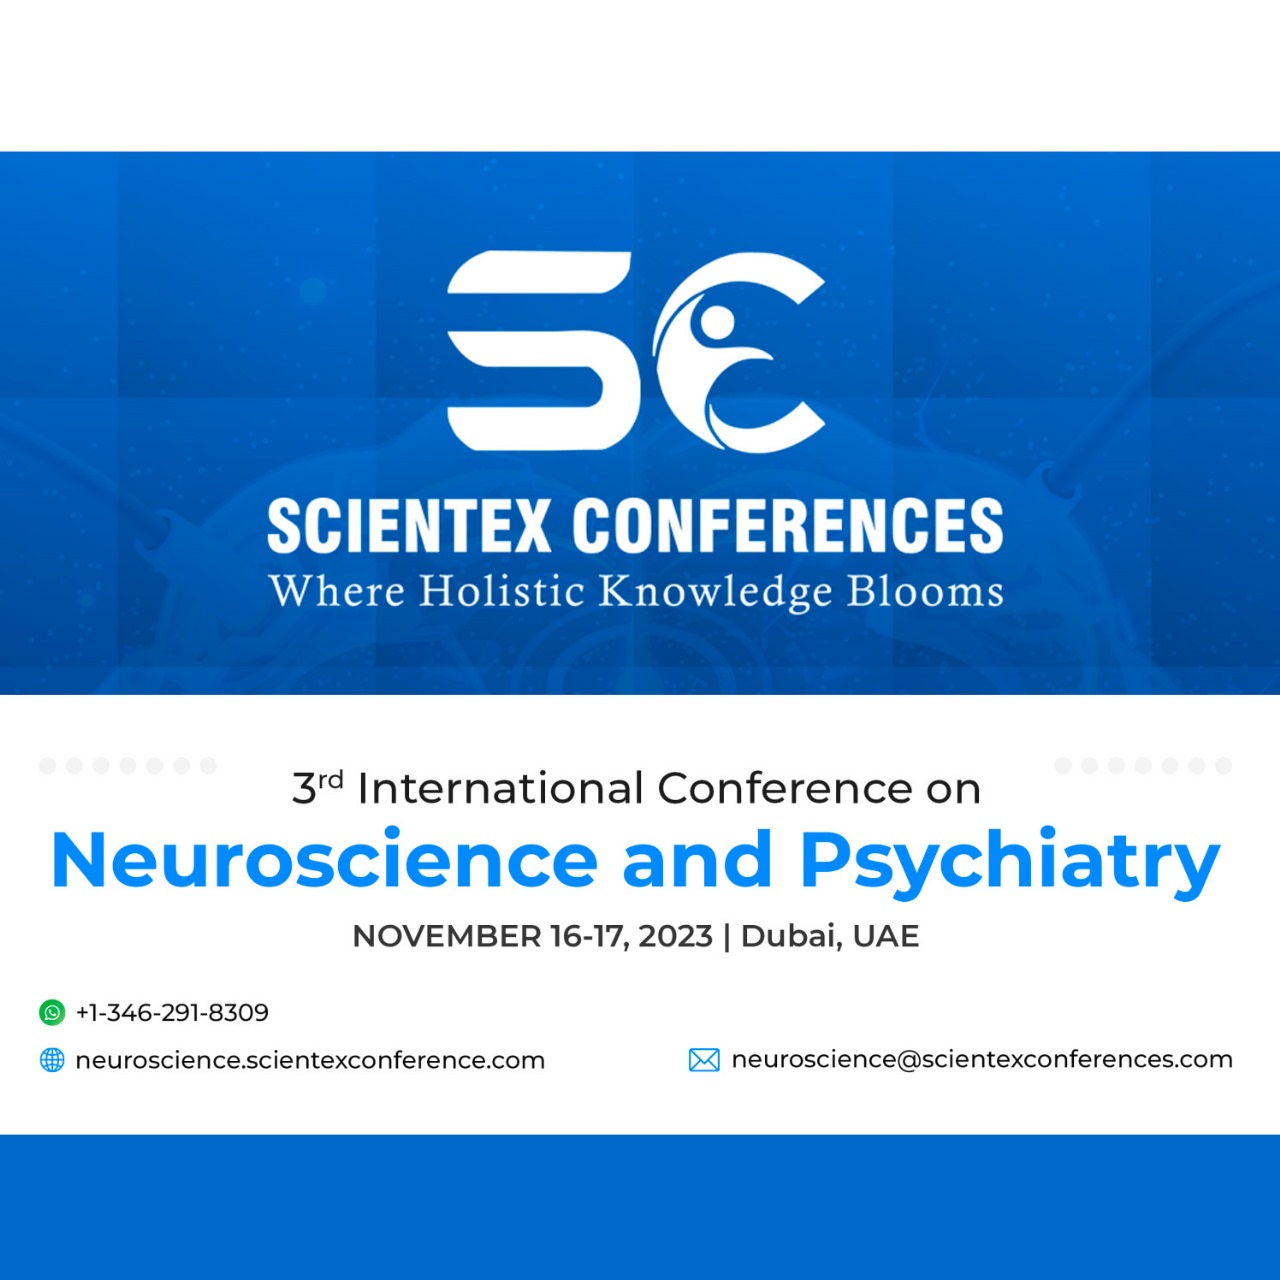 We welcome you all to attend the “3rd International Conference on Neuroscience and Psychiatry” scheduled during November 16-17, 2023 in Dubai, UAE.